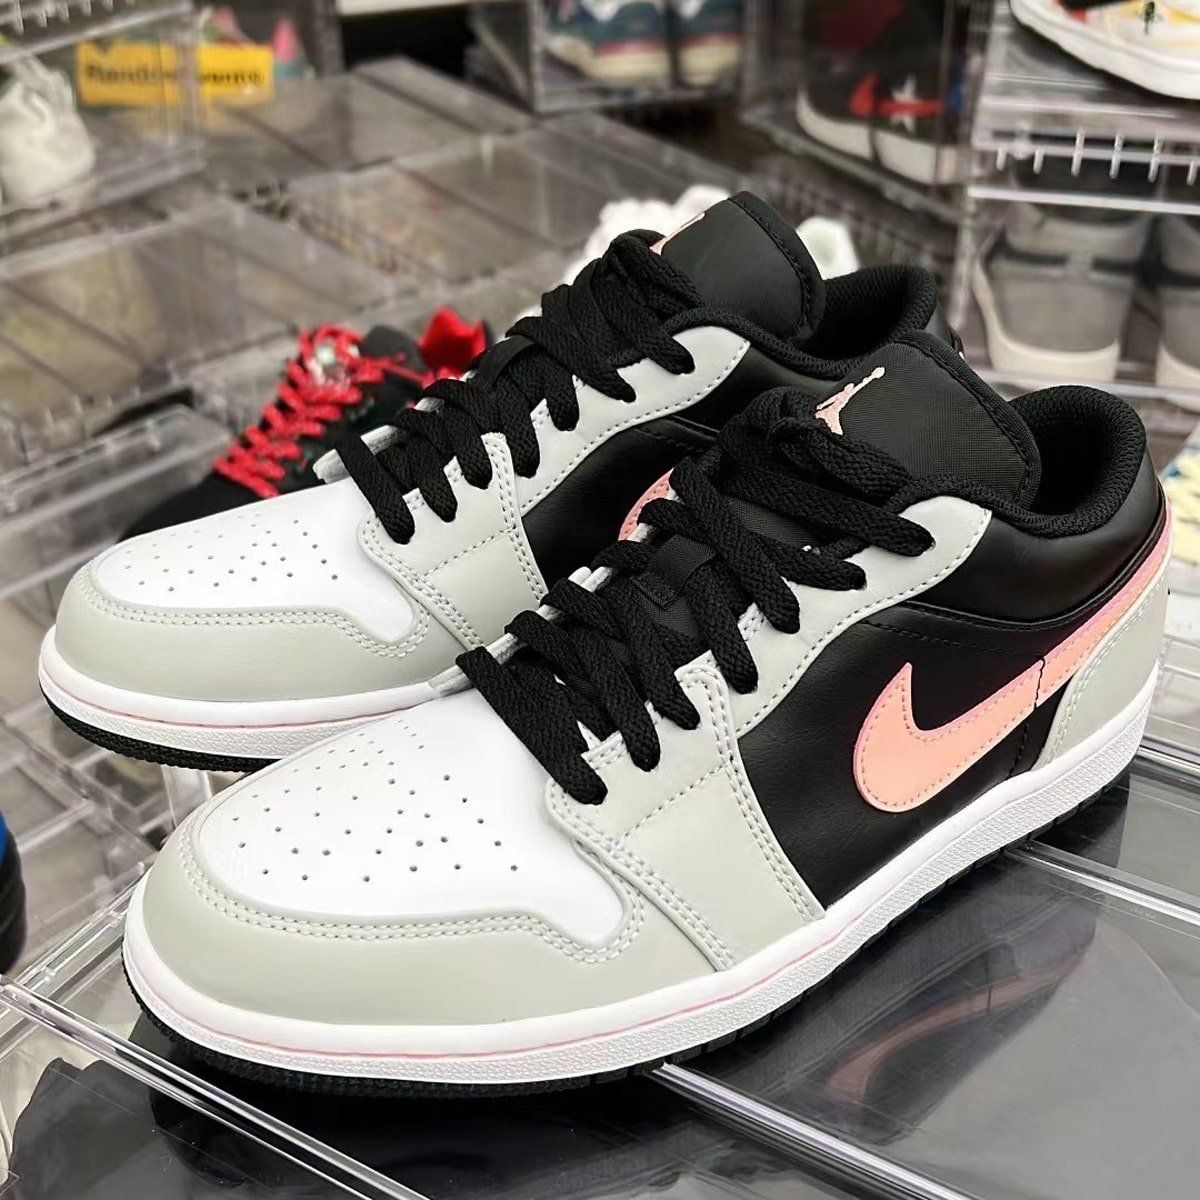 New Air Jordan 1 Low Appears in Black, Grey and Pink | HOUSE OF HEAT